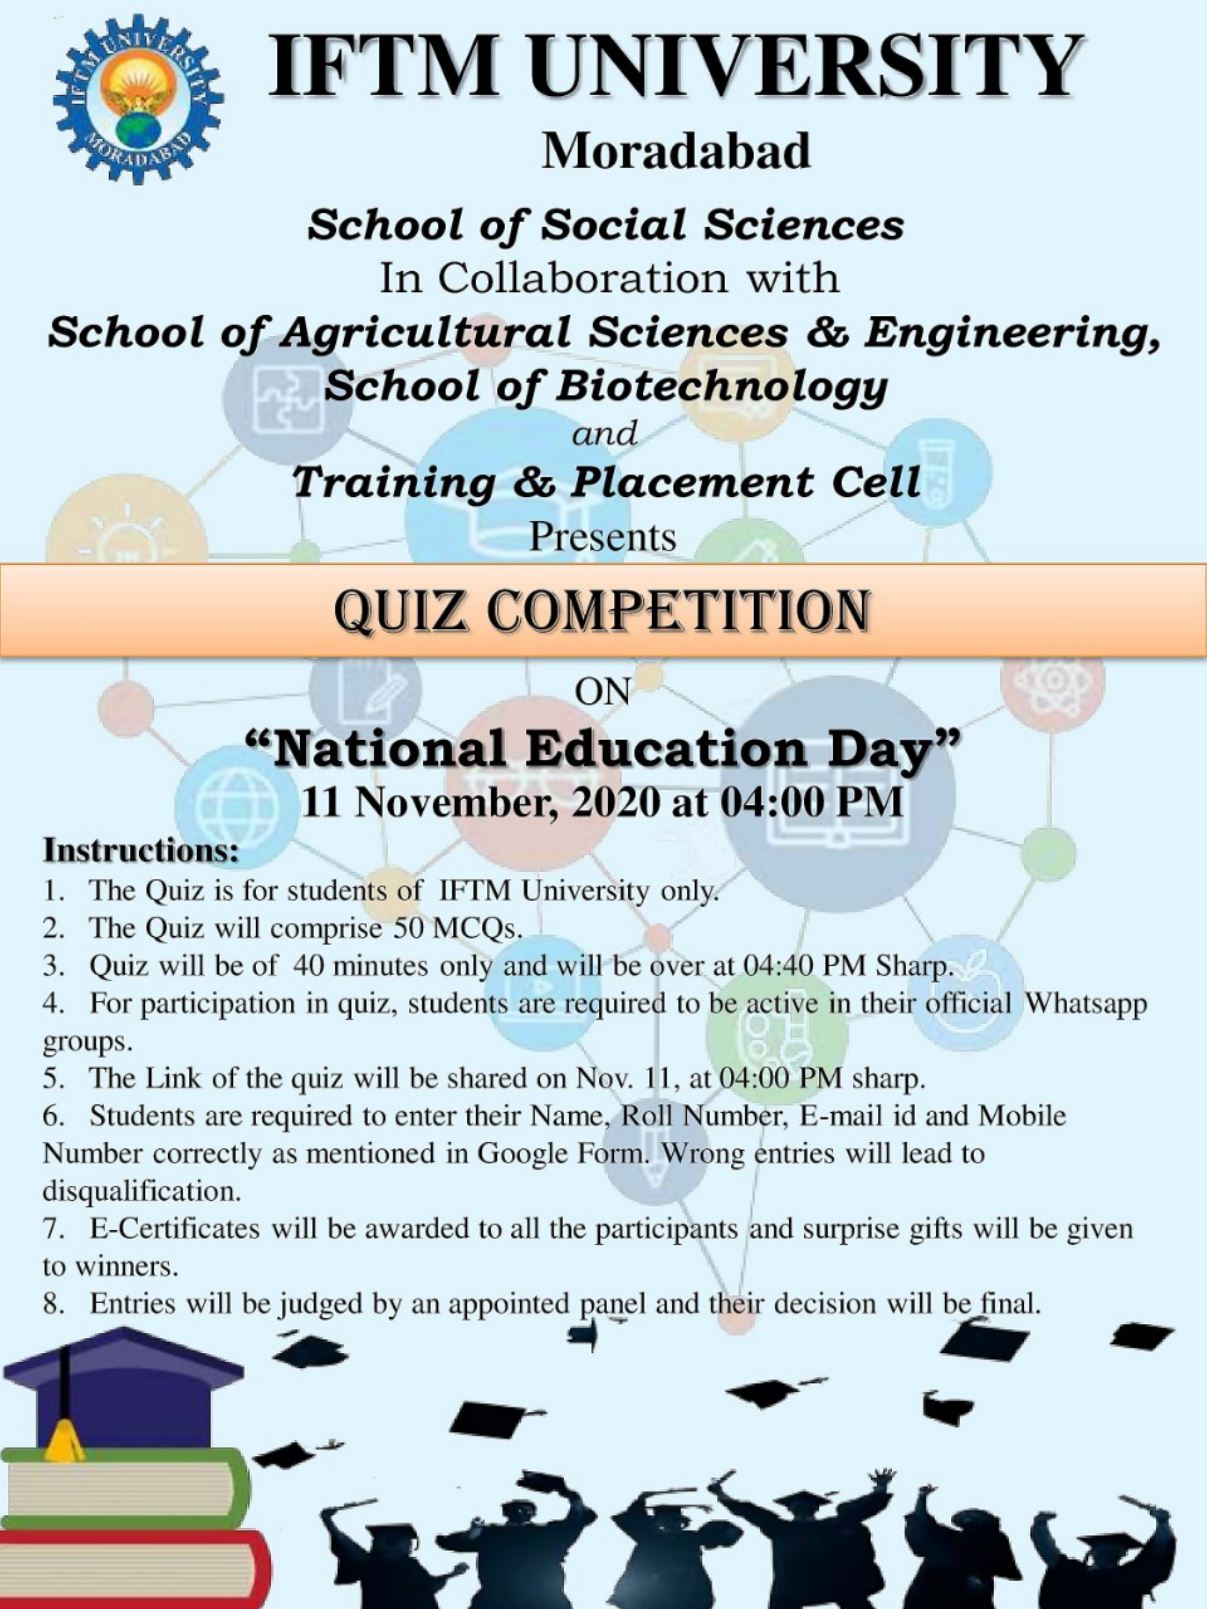 Quiz Competition on “National Education Day”